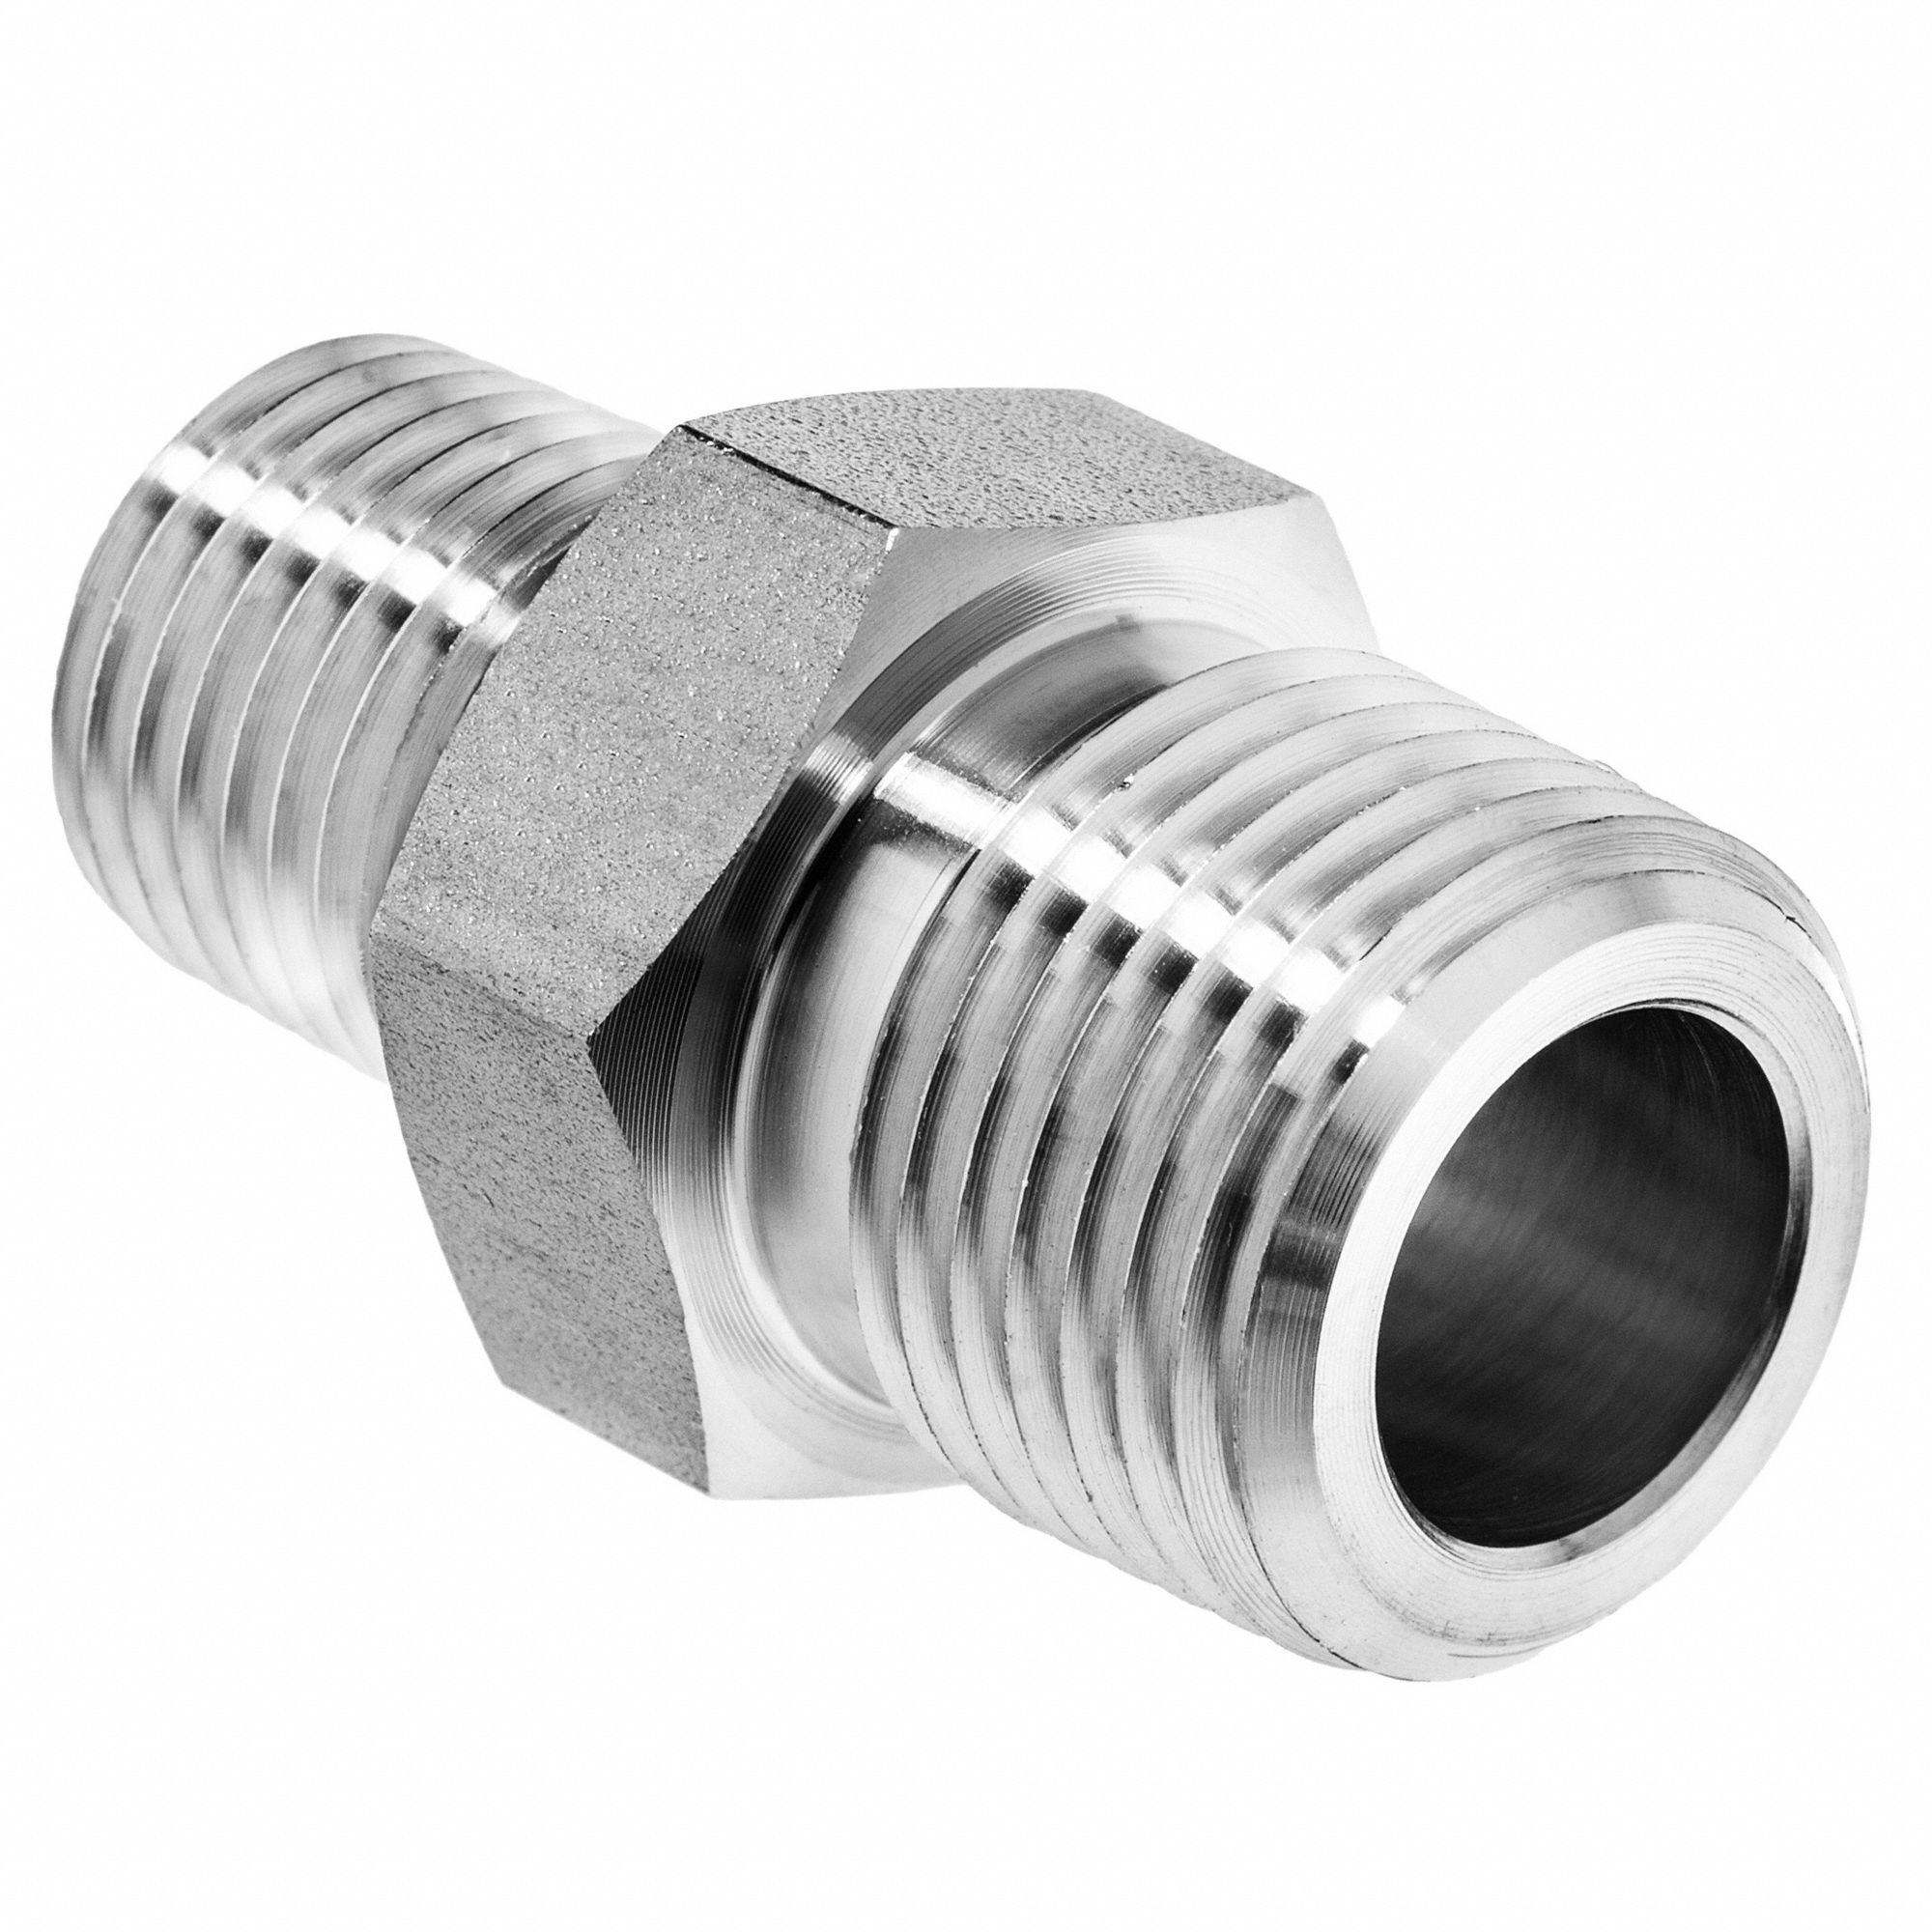 304 STAINLESS STEEL 1/2" x 1" CLOSE NIPPLE NPT Male Pipe Fitting 2 3 4 or 5 Pcs 